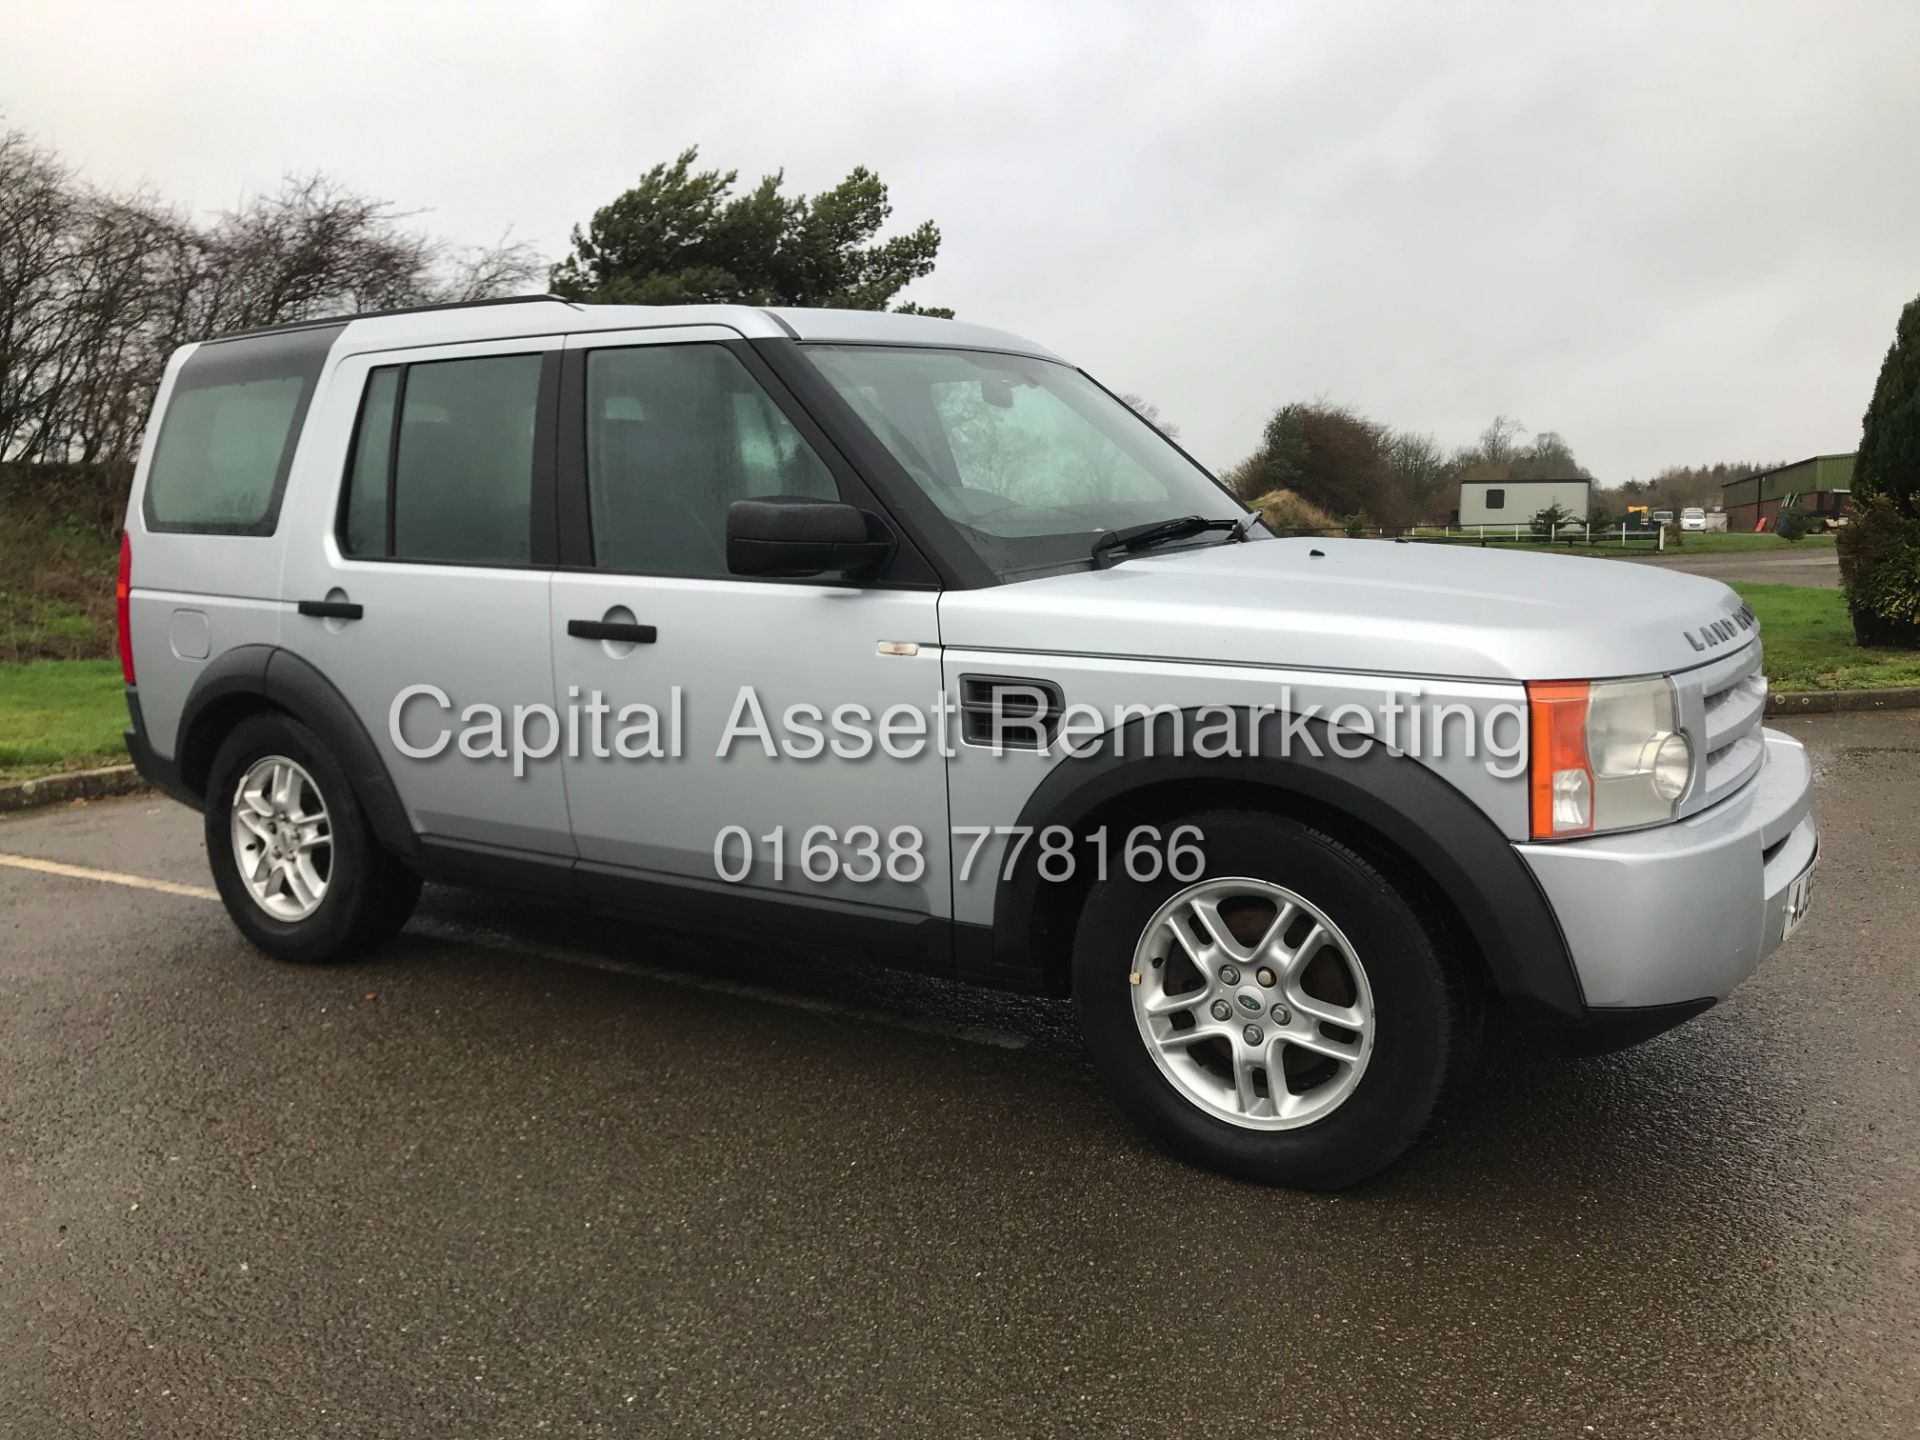 (ON SALE) LANDROVER DISCOVERY 3 "TDV6 2.7 AUTO - 59 REG - LEATHER - GREAT SPEC - 7 SEATER - WOW!!!